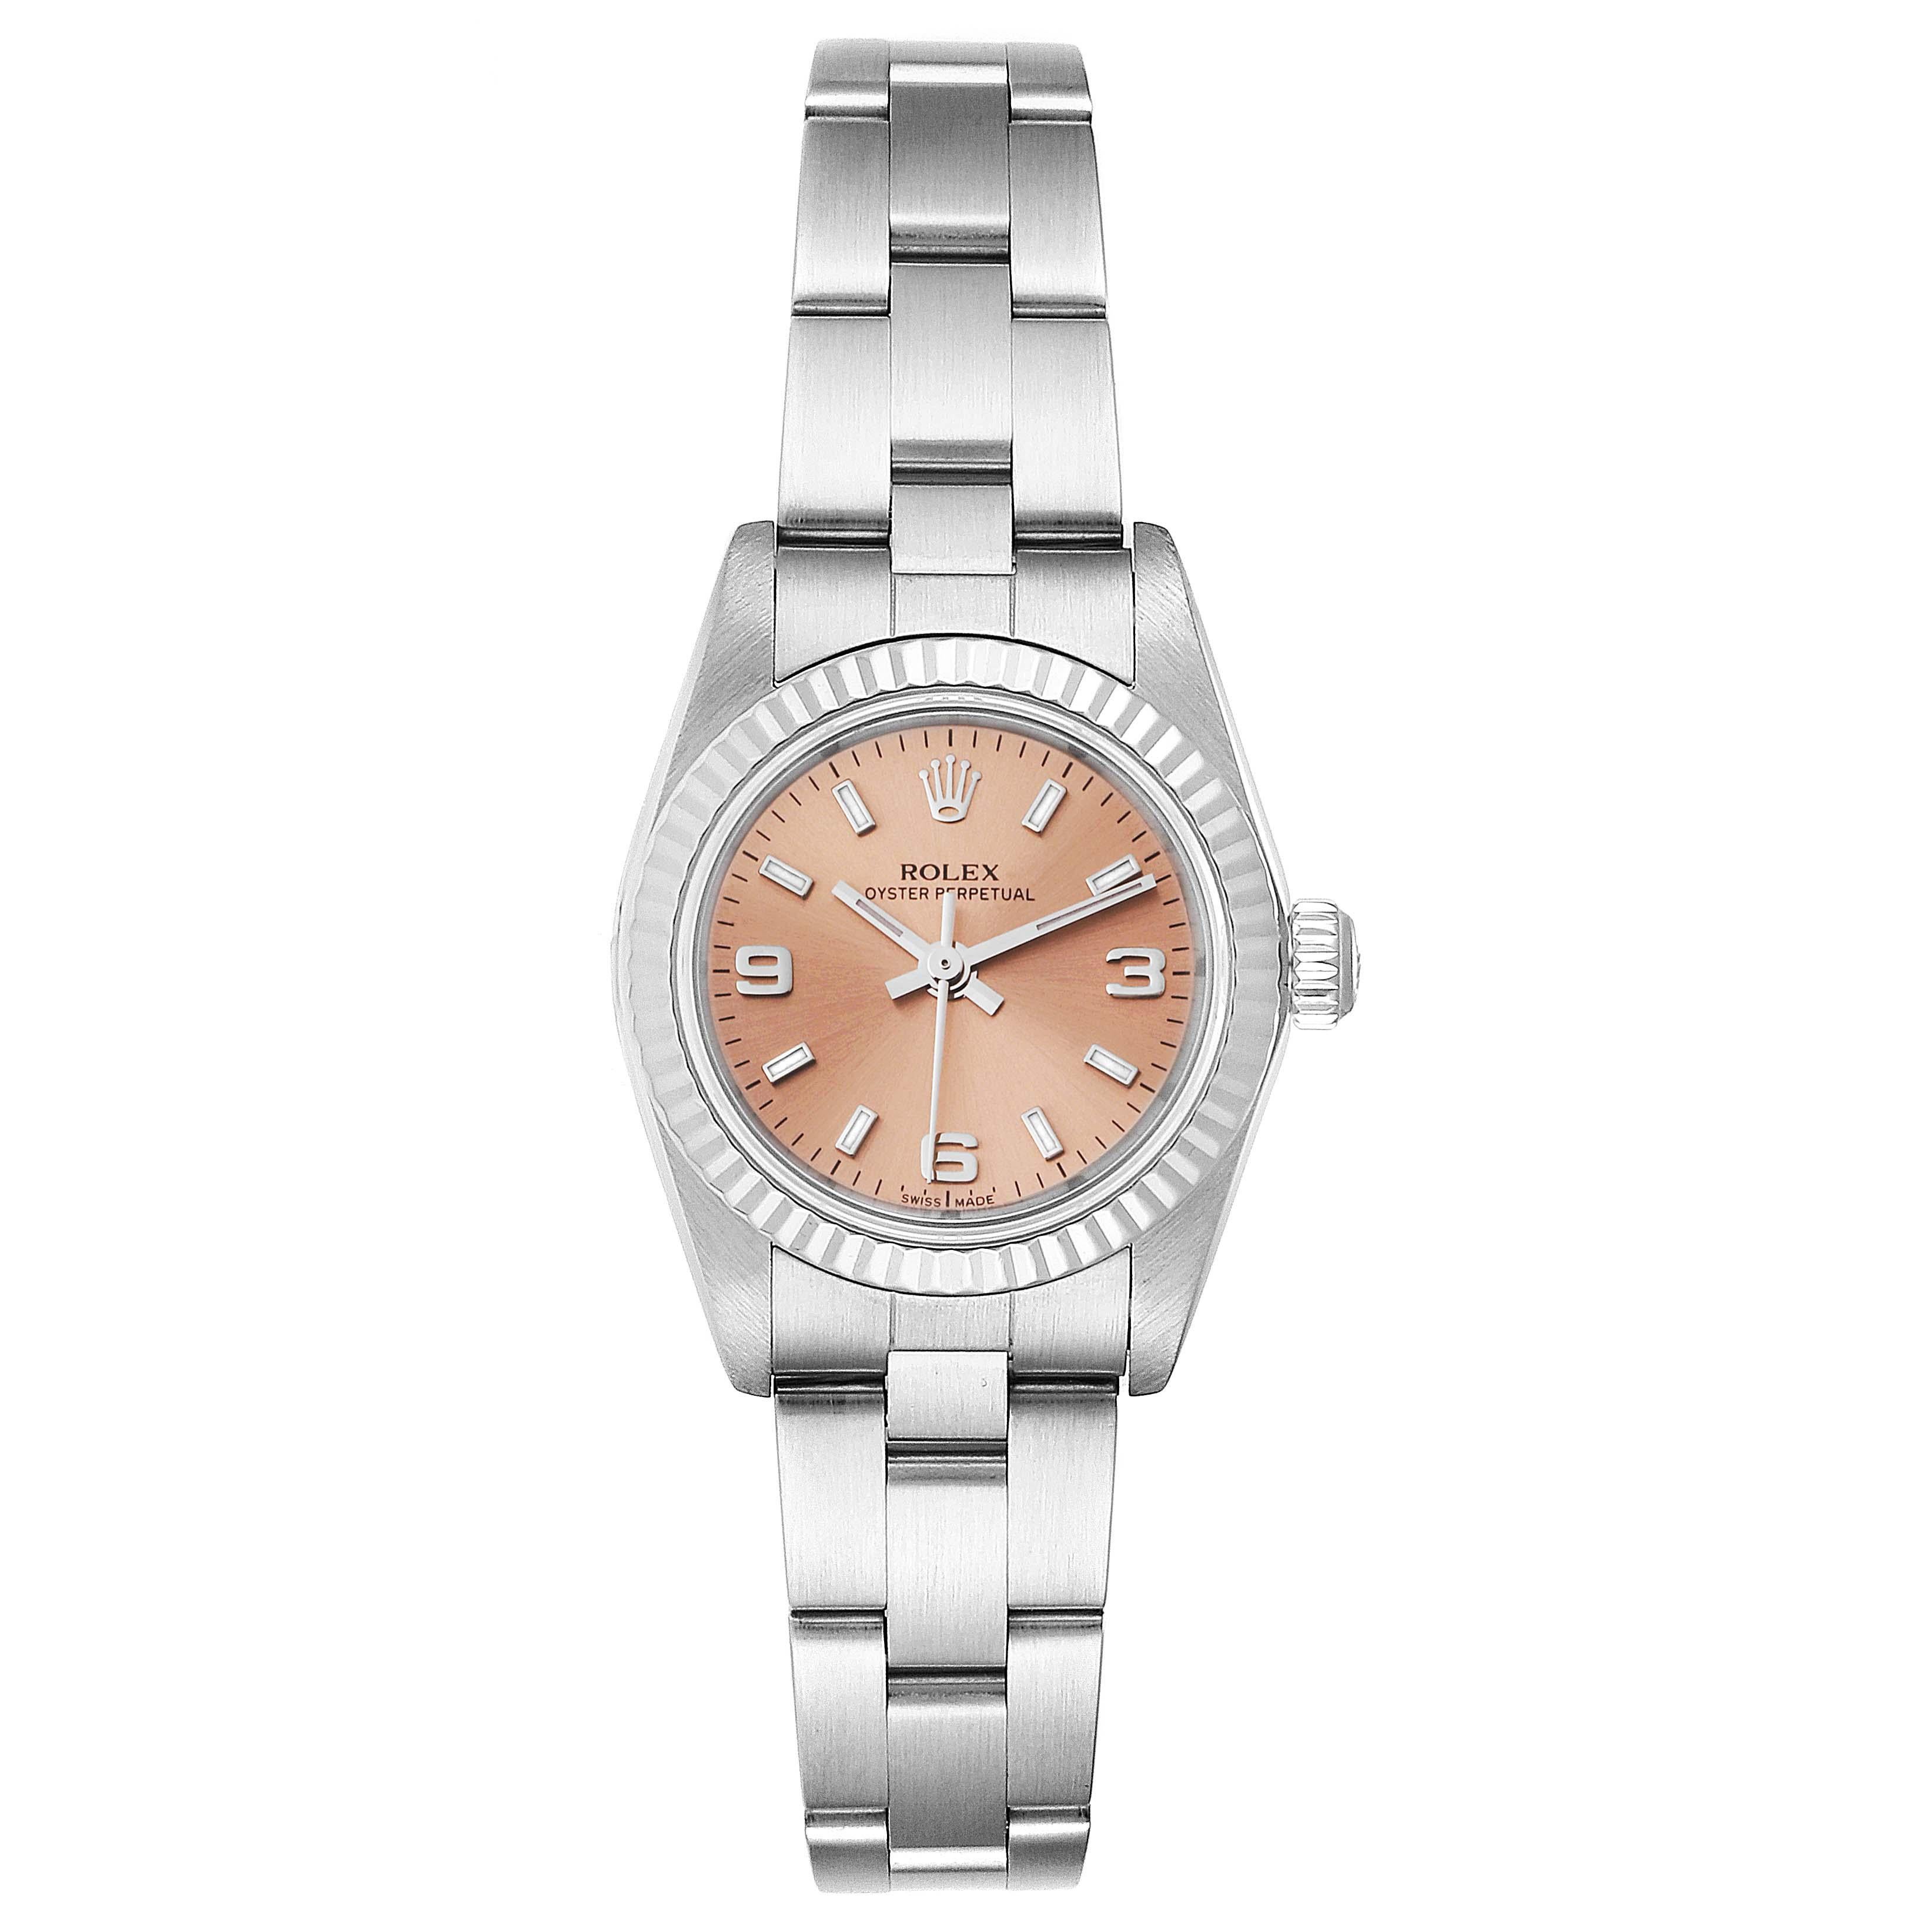 Rolex Oyster Perpetual Salmon Dial Steel White Gold Ladies Watch 76094. Officially certified chronometer self-winding movement. Stainless steel oyster case 24.0 mm in diameter. Rolex logo on a crown. 18k white gold fluted bezel. Scratch resistant